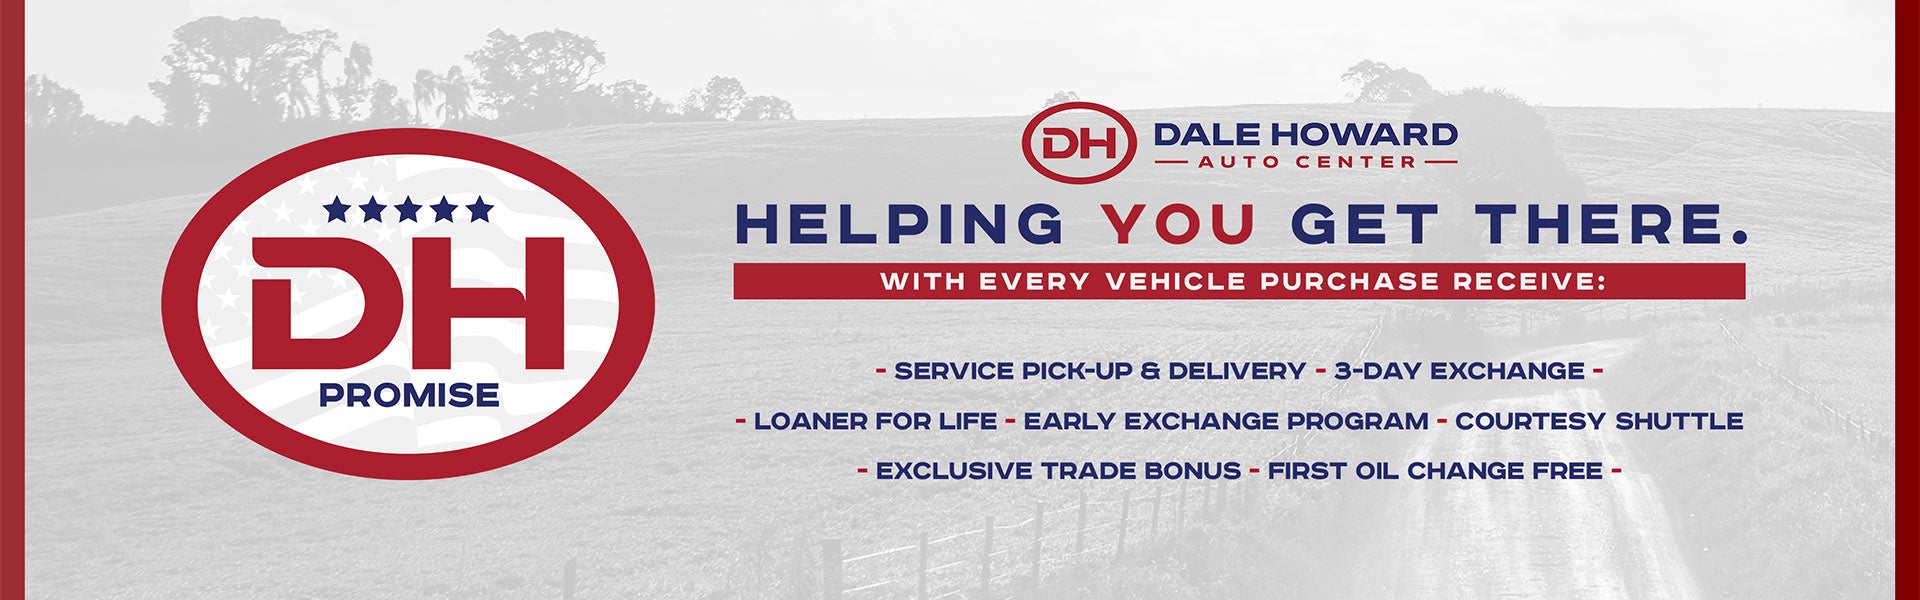 Dale Howard Chevrolet helping you get there with every vehicle purchase receive